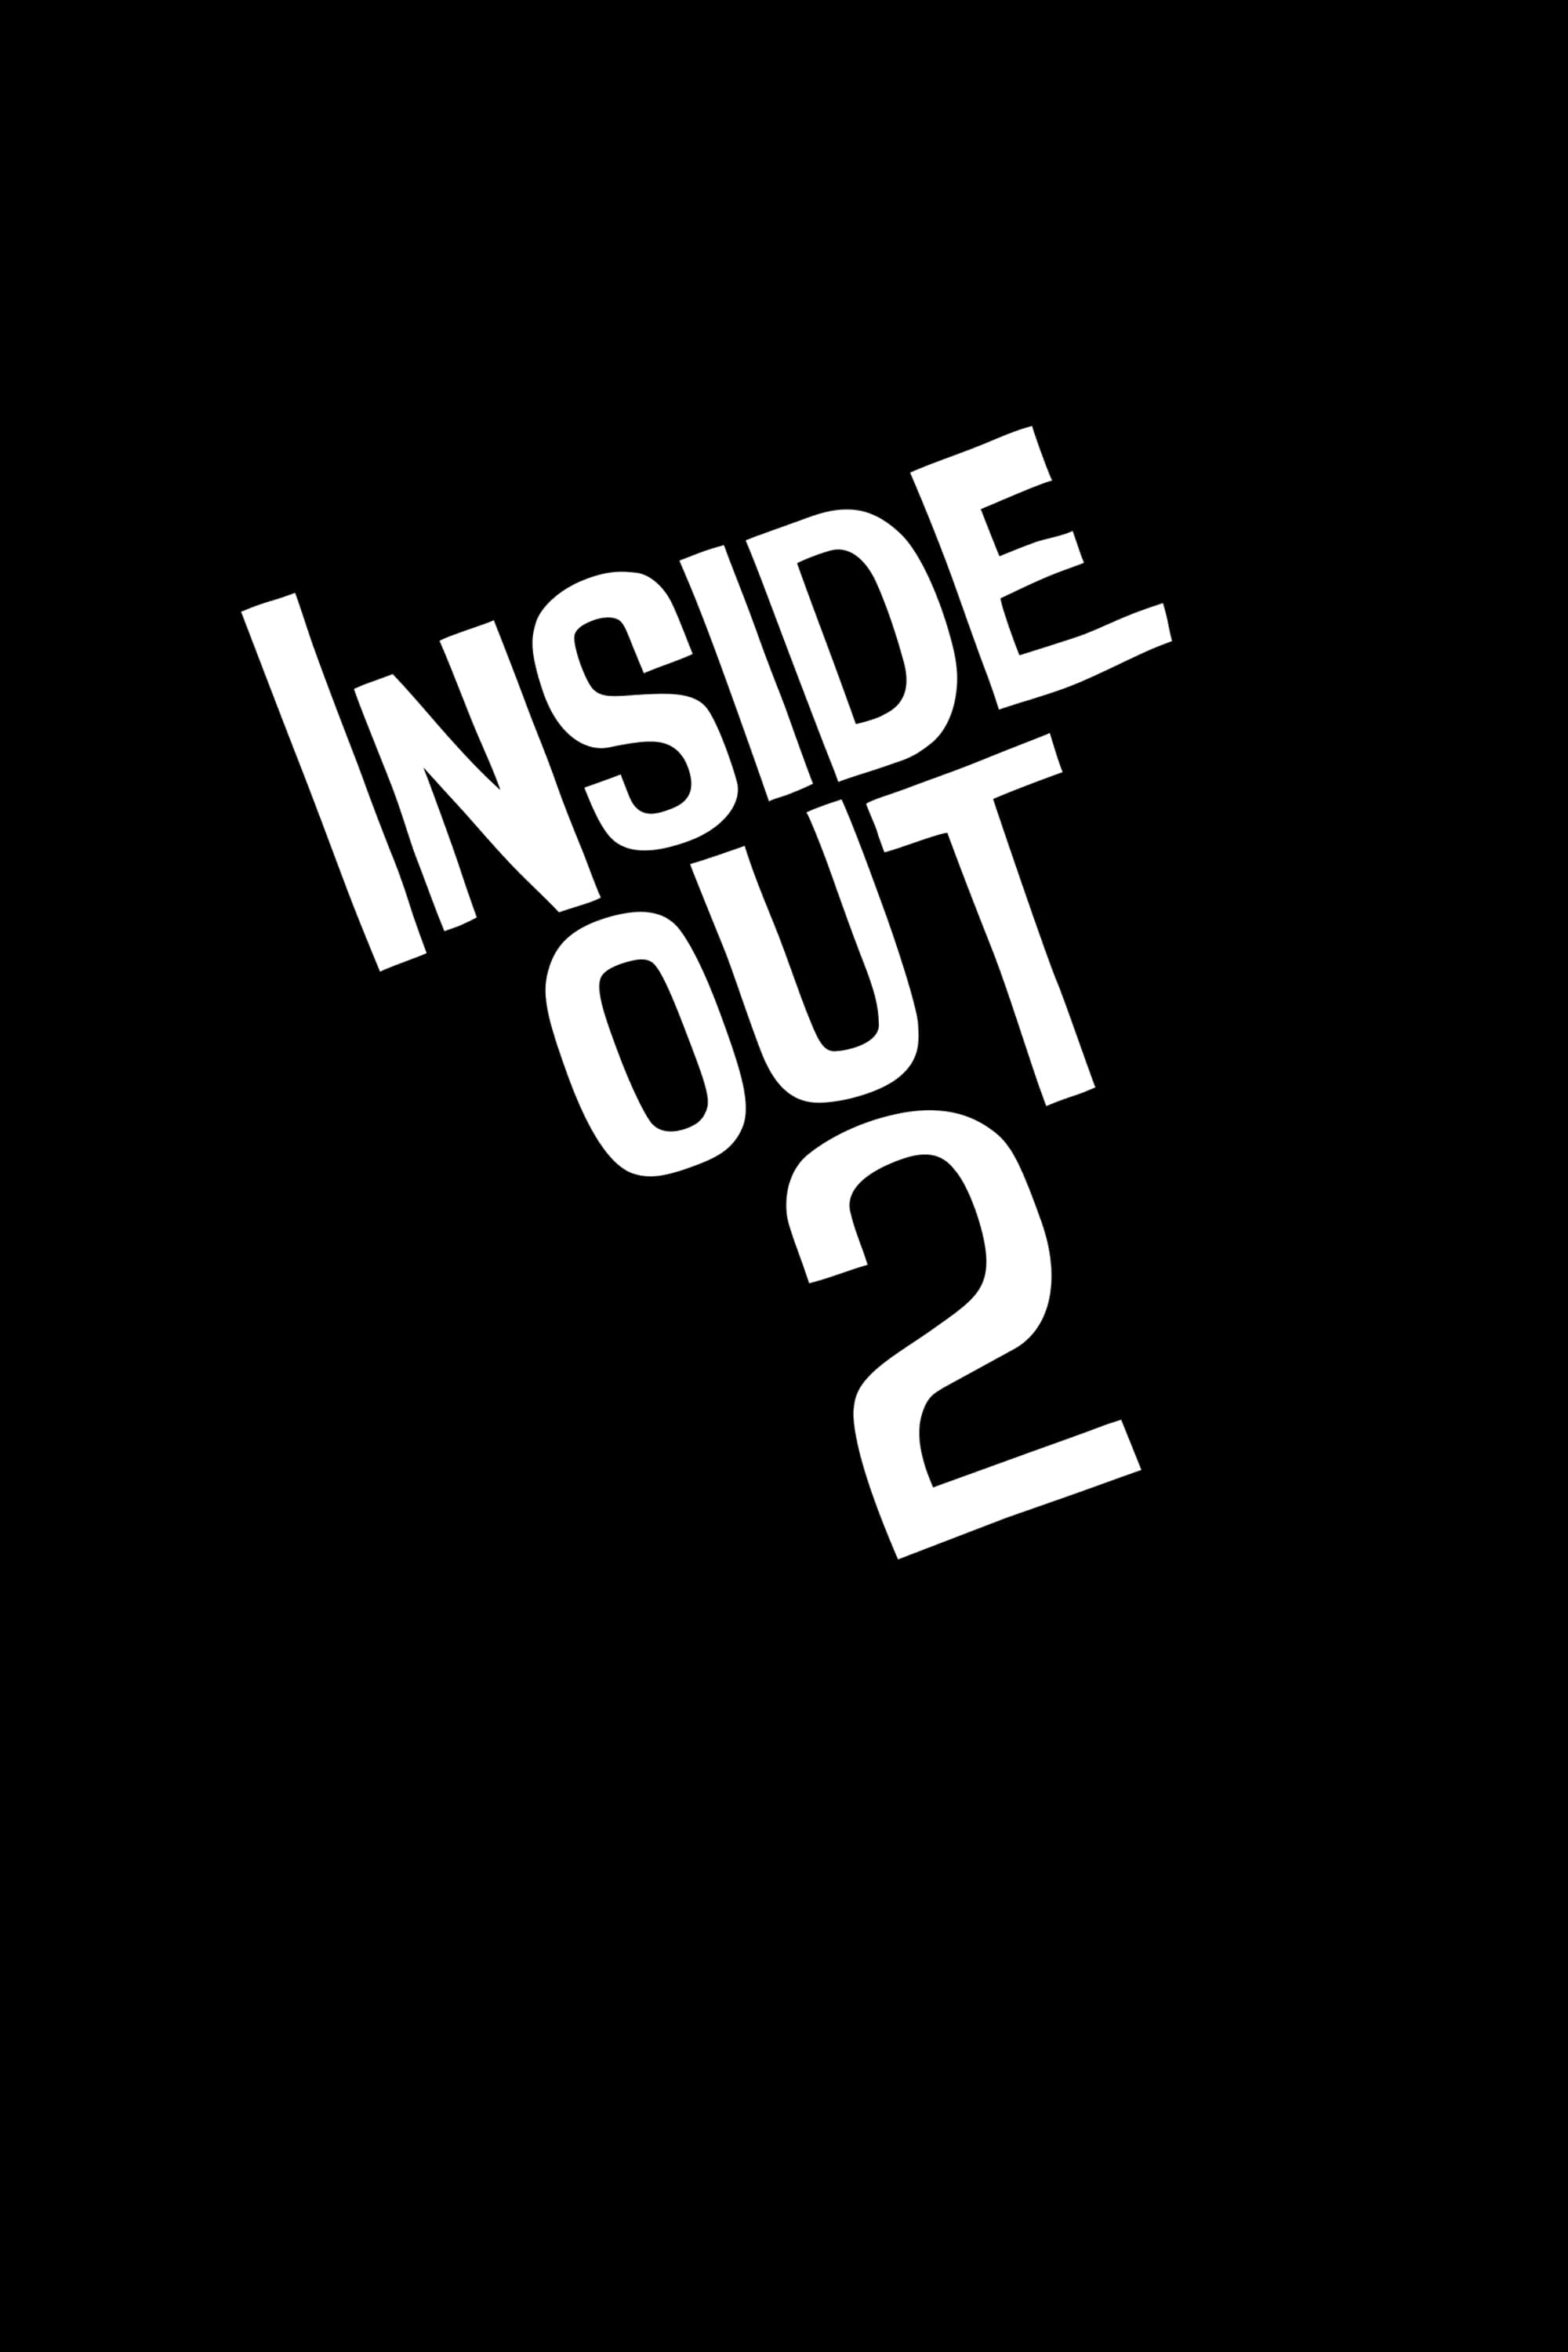 Poster for the movie "Inside Out 2"